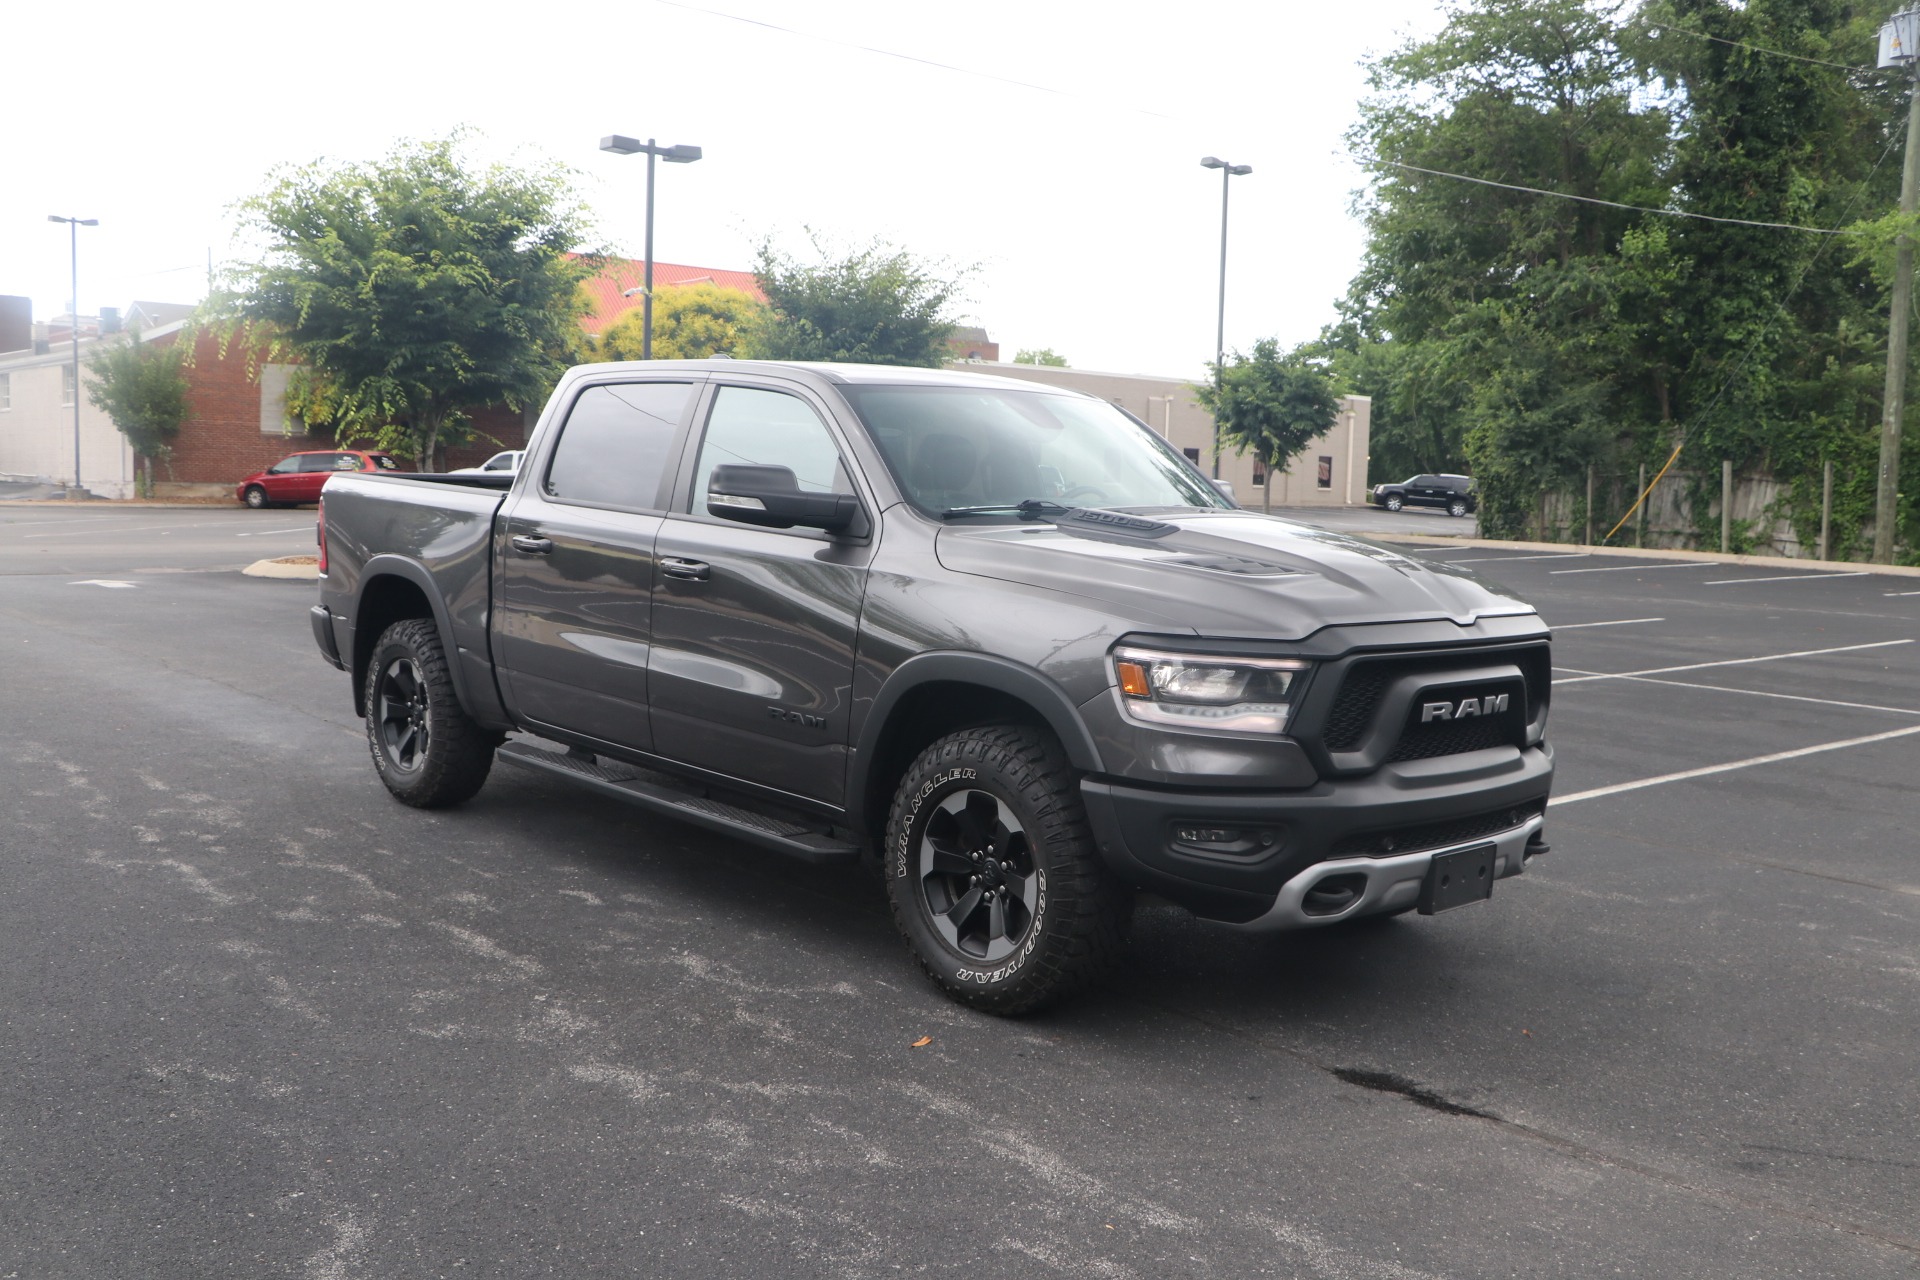 Used 2019 Ram Ram 1500 REBEL CREW CAB 4X4 for sale Sold at Auto Collection in Murfreesboro TN 37129 1